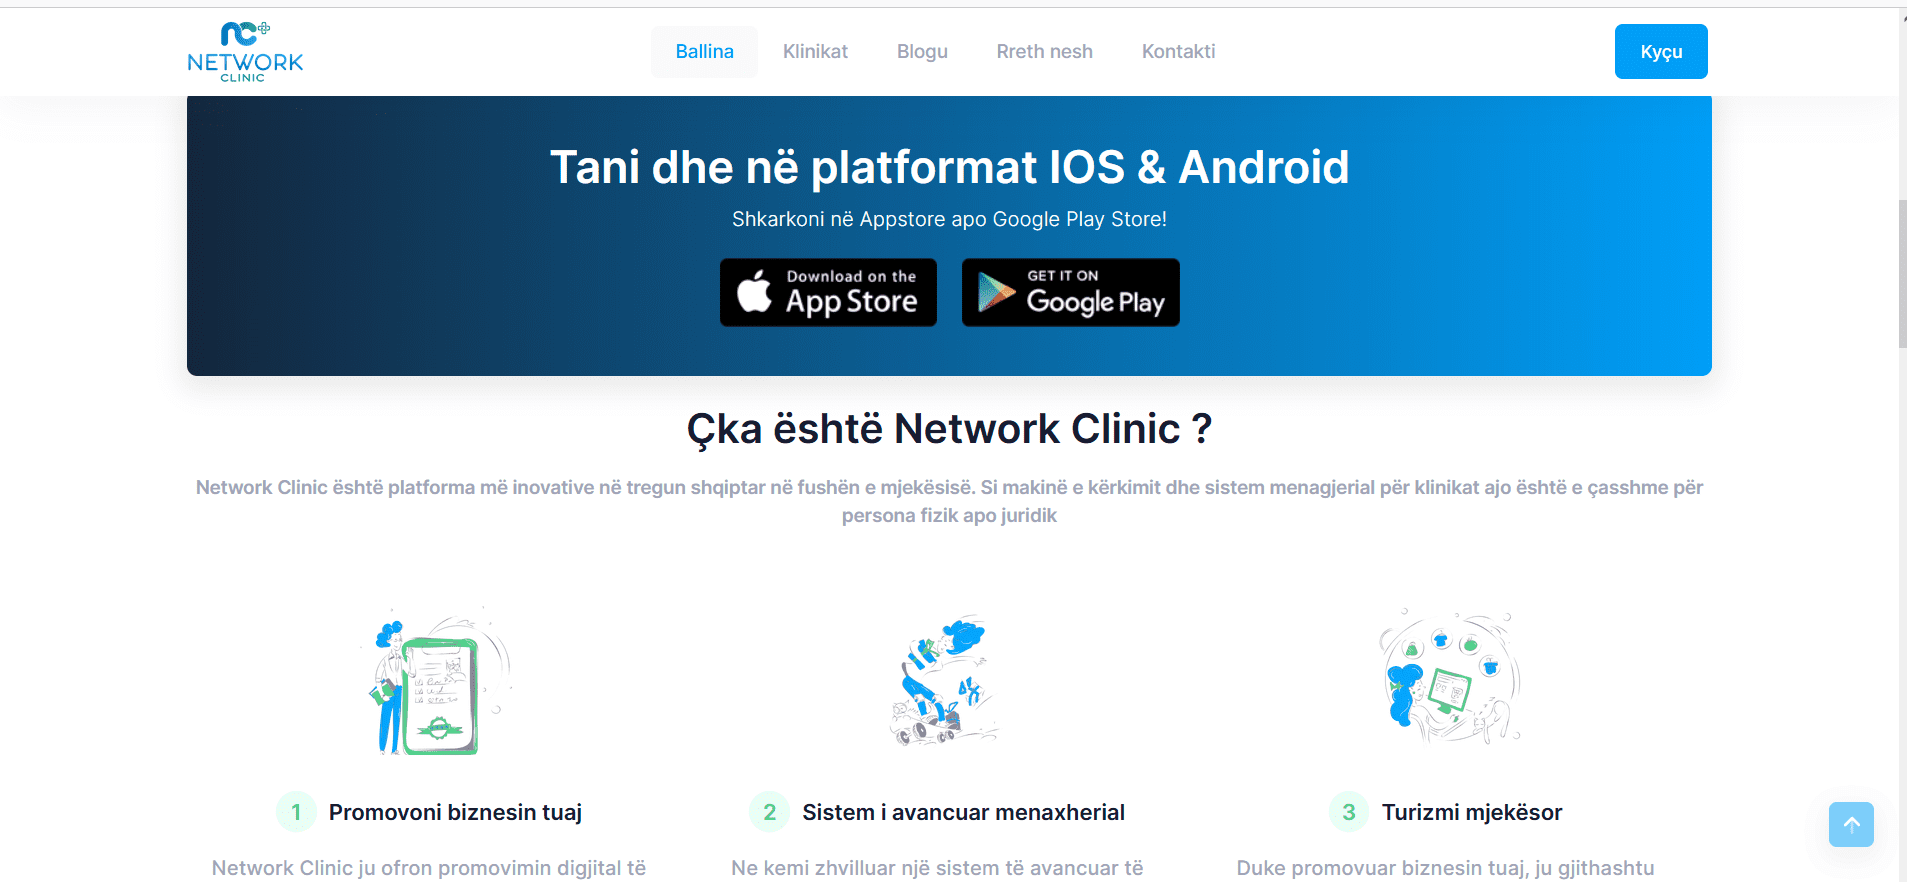 Network Clinic